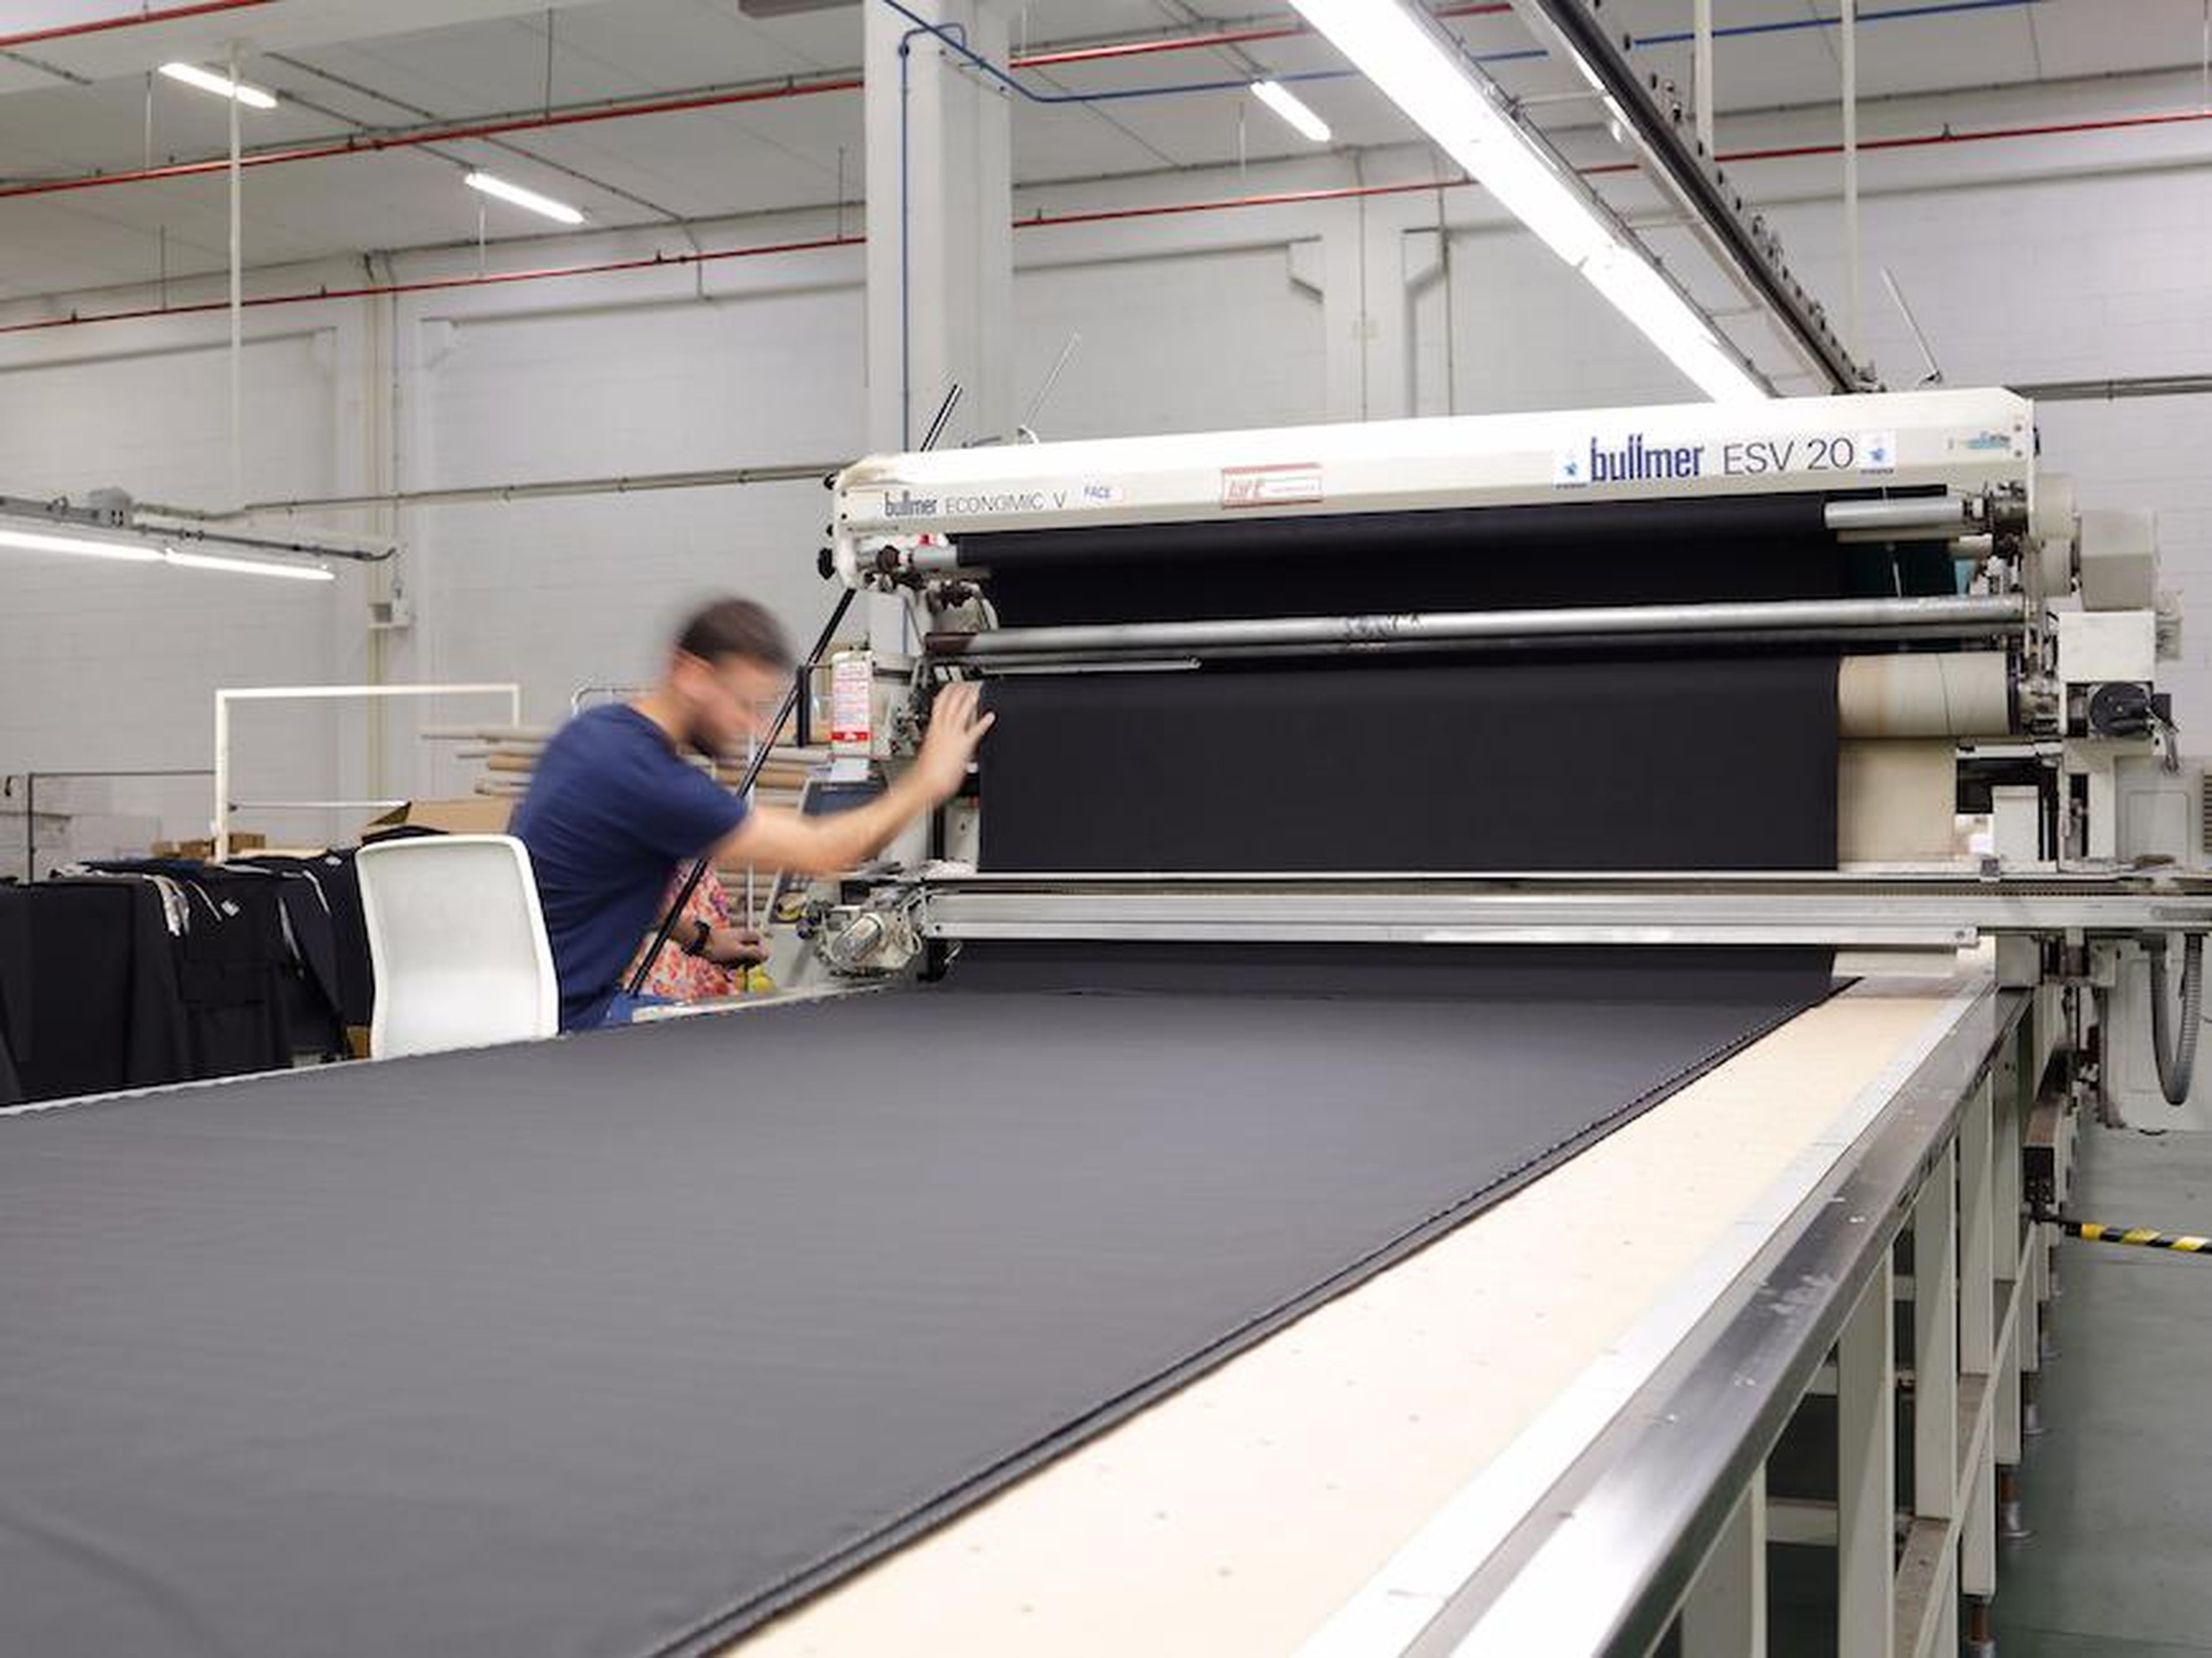 The fabric is laid out under large cutting machines, and the paper is placed on top.